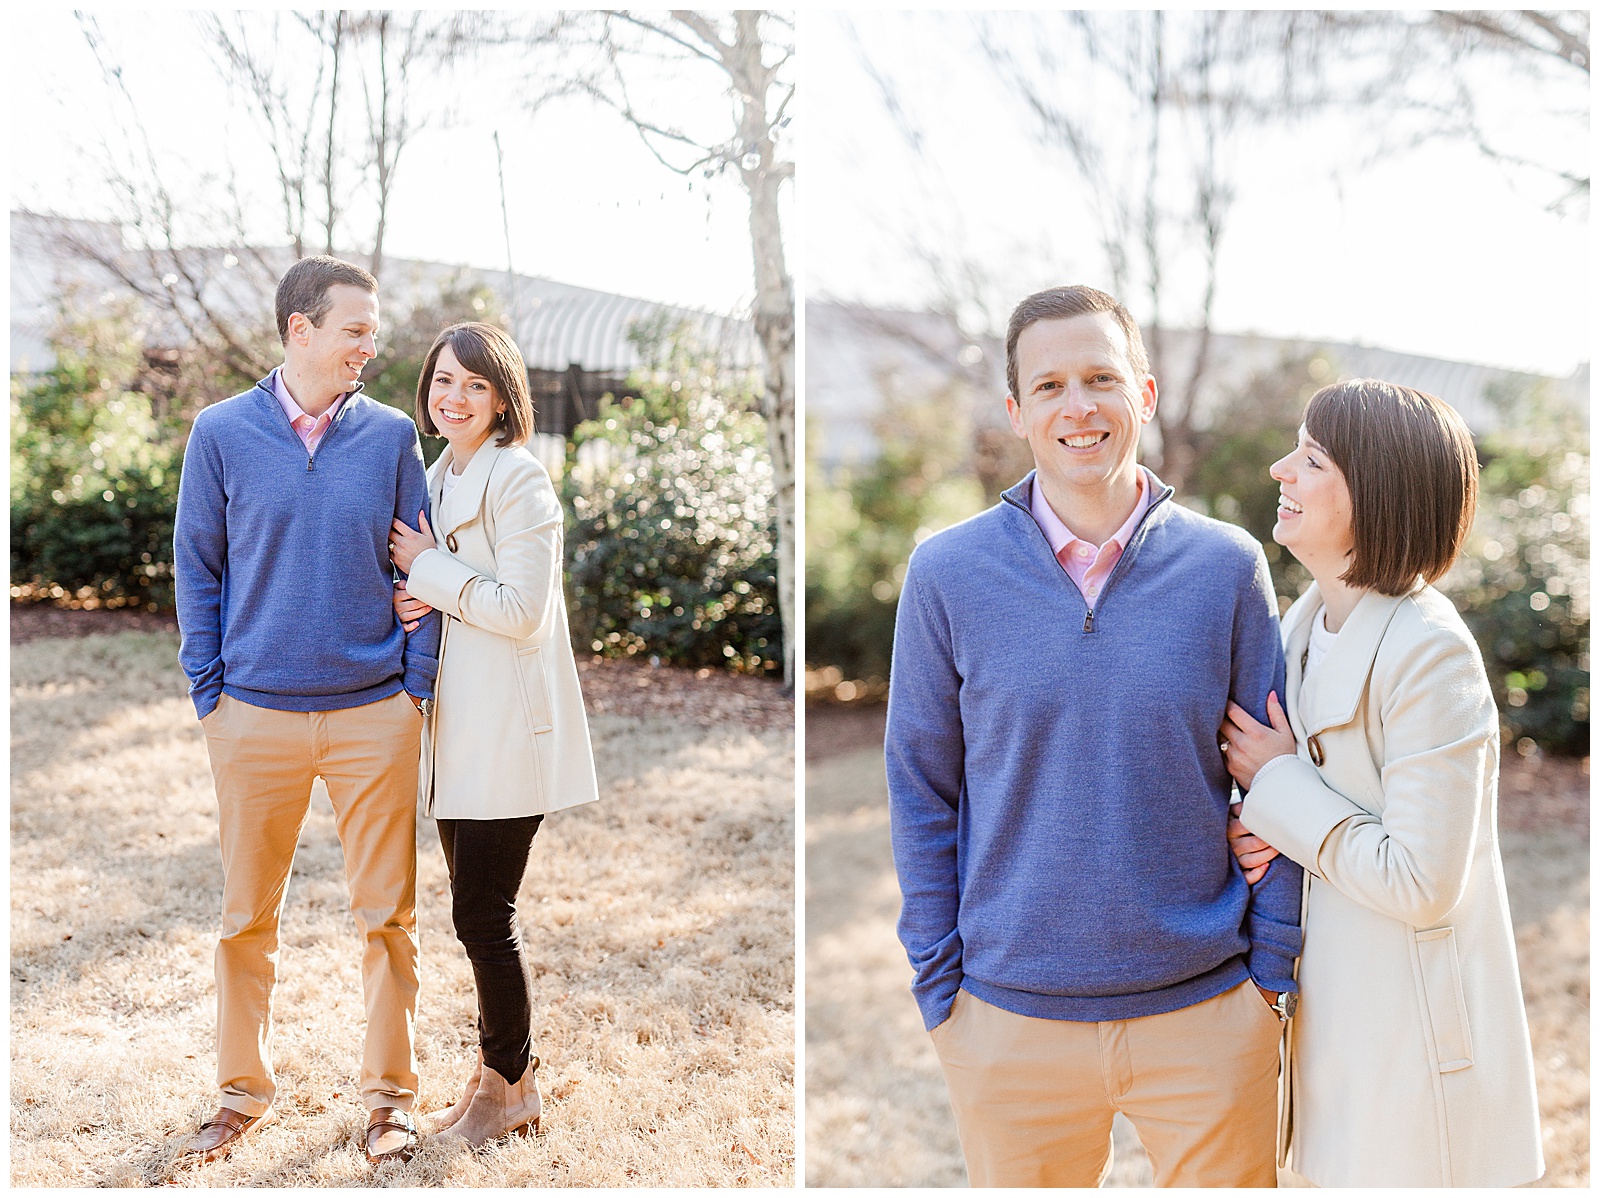 Sweet Couple in Park at Outdoor Winter Golden Hour Engagement Session in NC - white coat, short brown hair bride outfit ideas